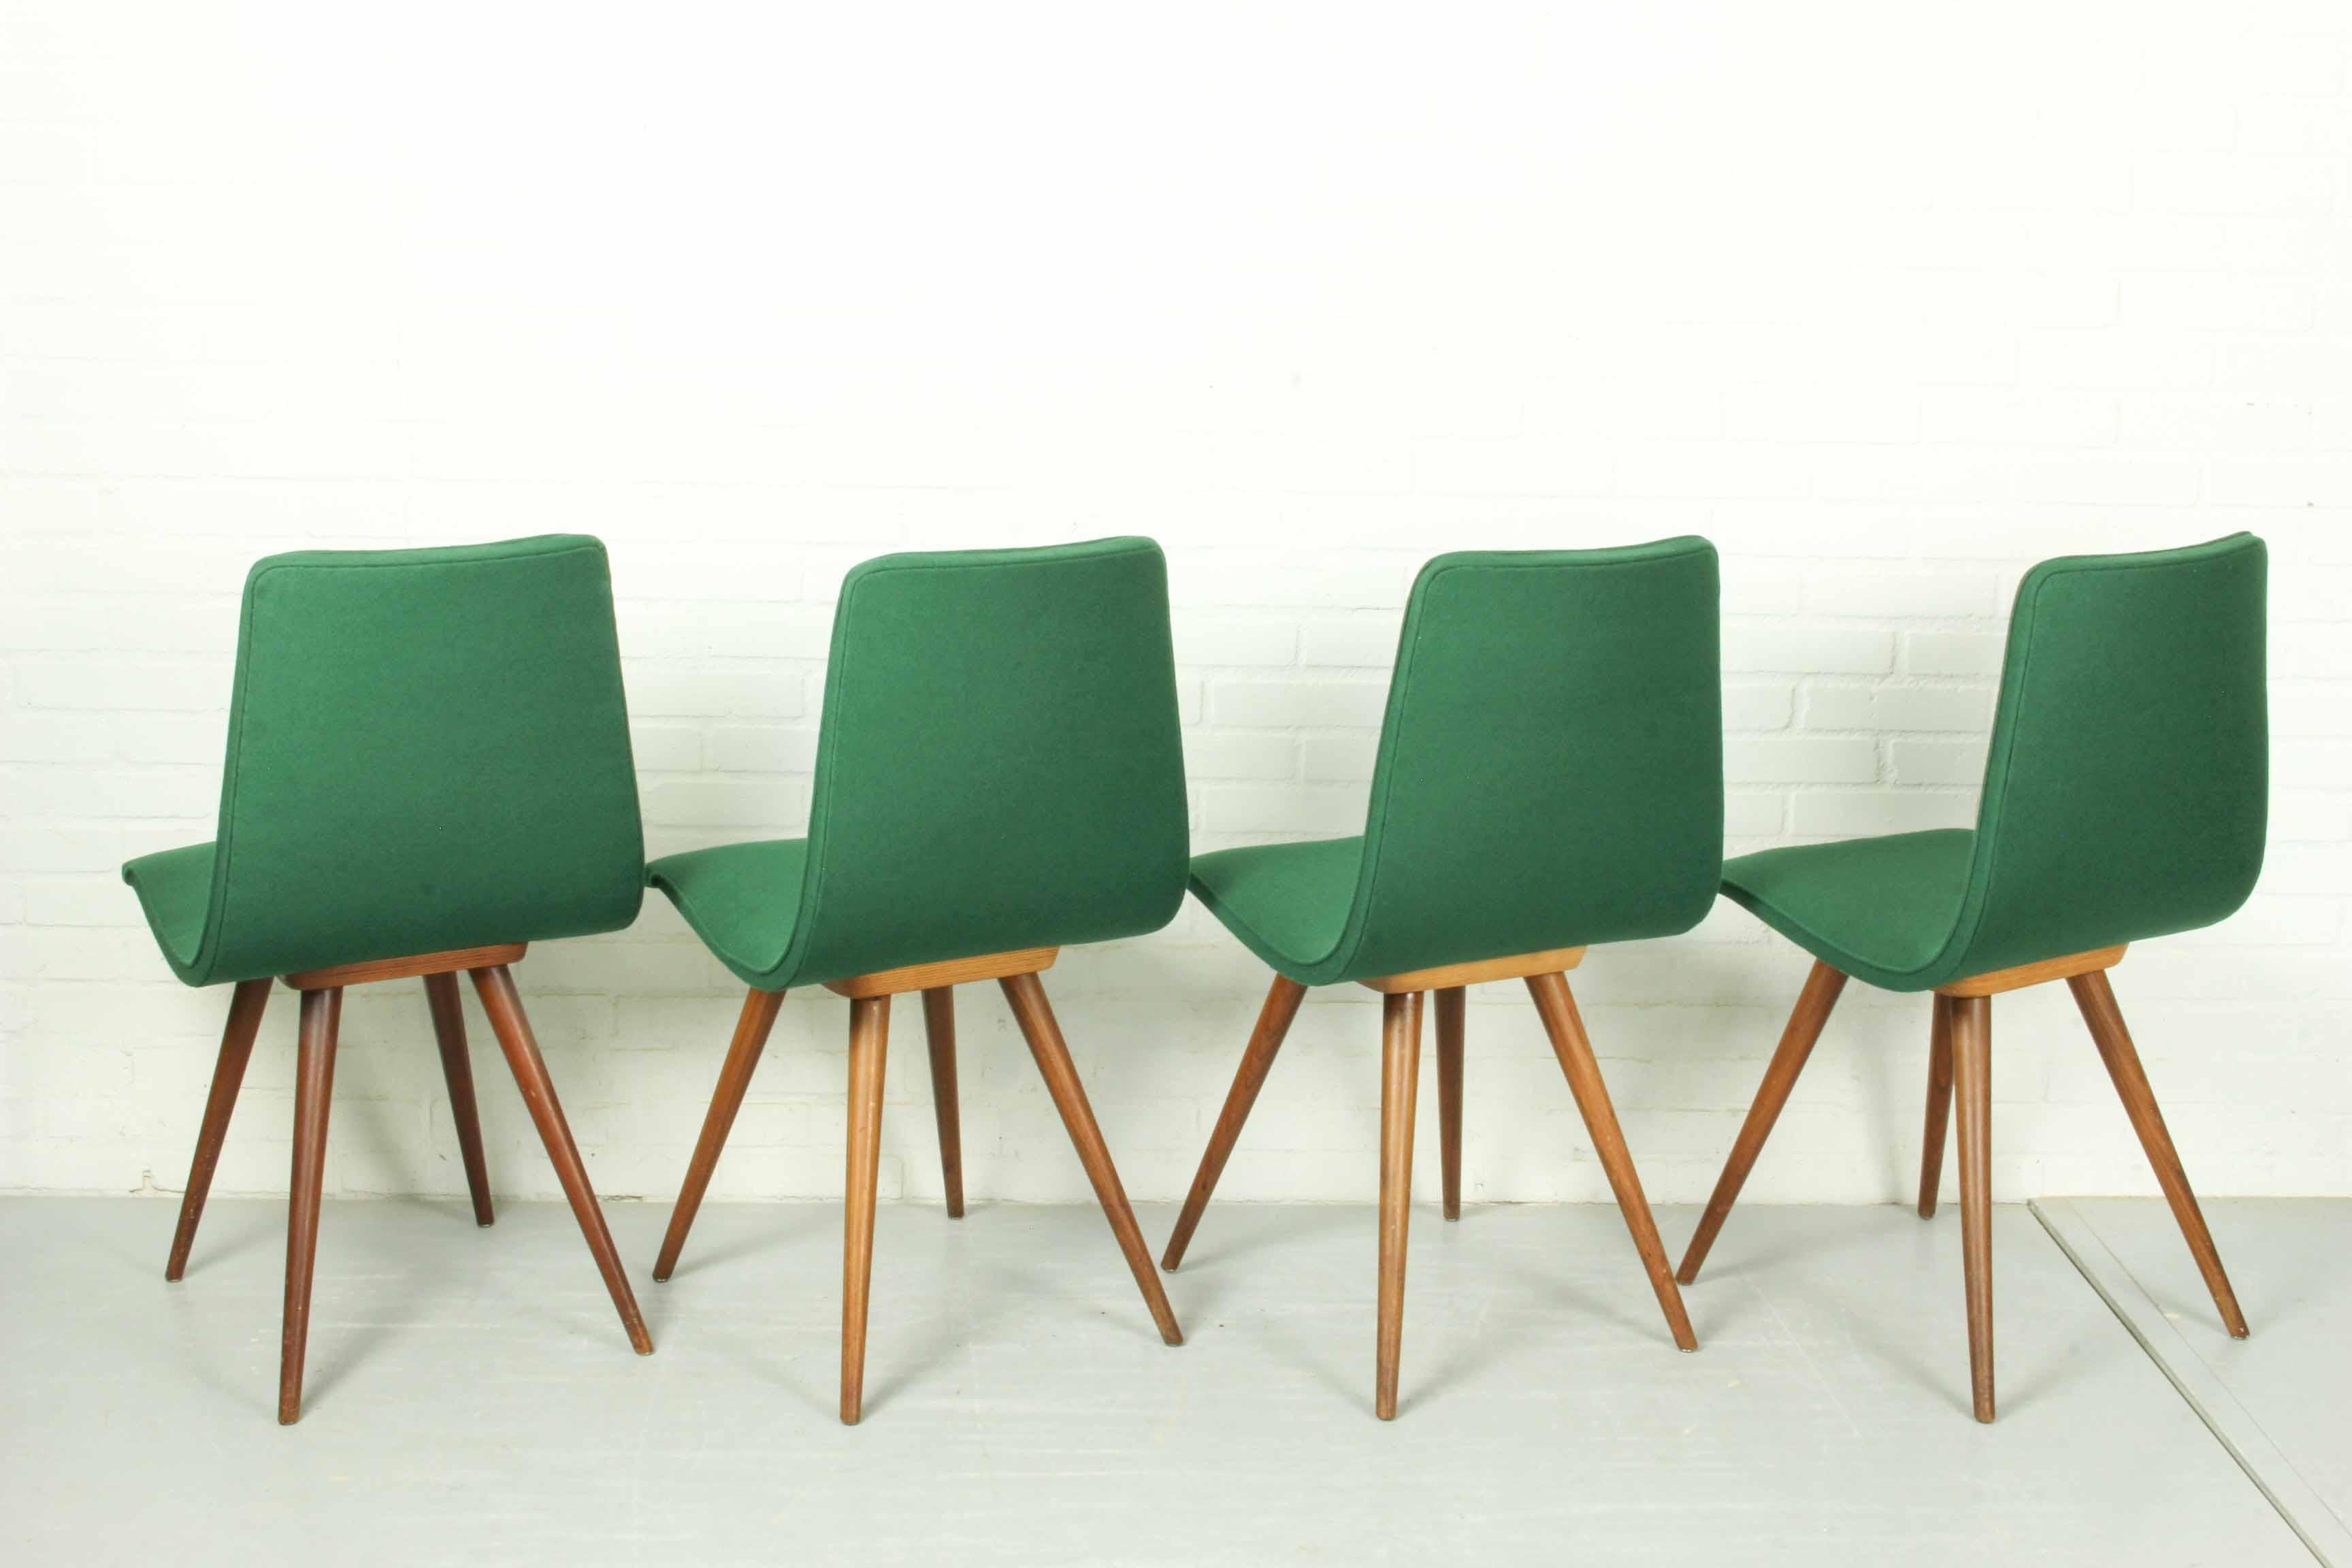 Set of 4 Teak Dining Chairs by Van Os, 1950s For Sale 3